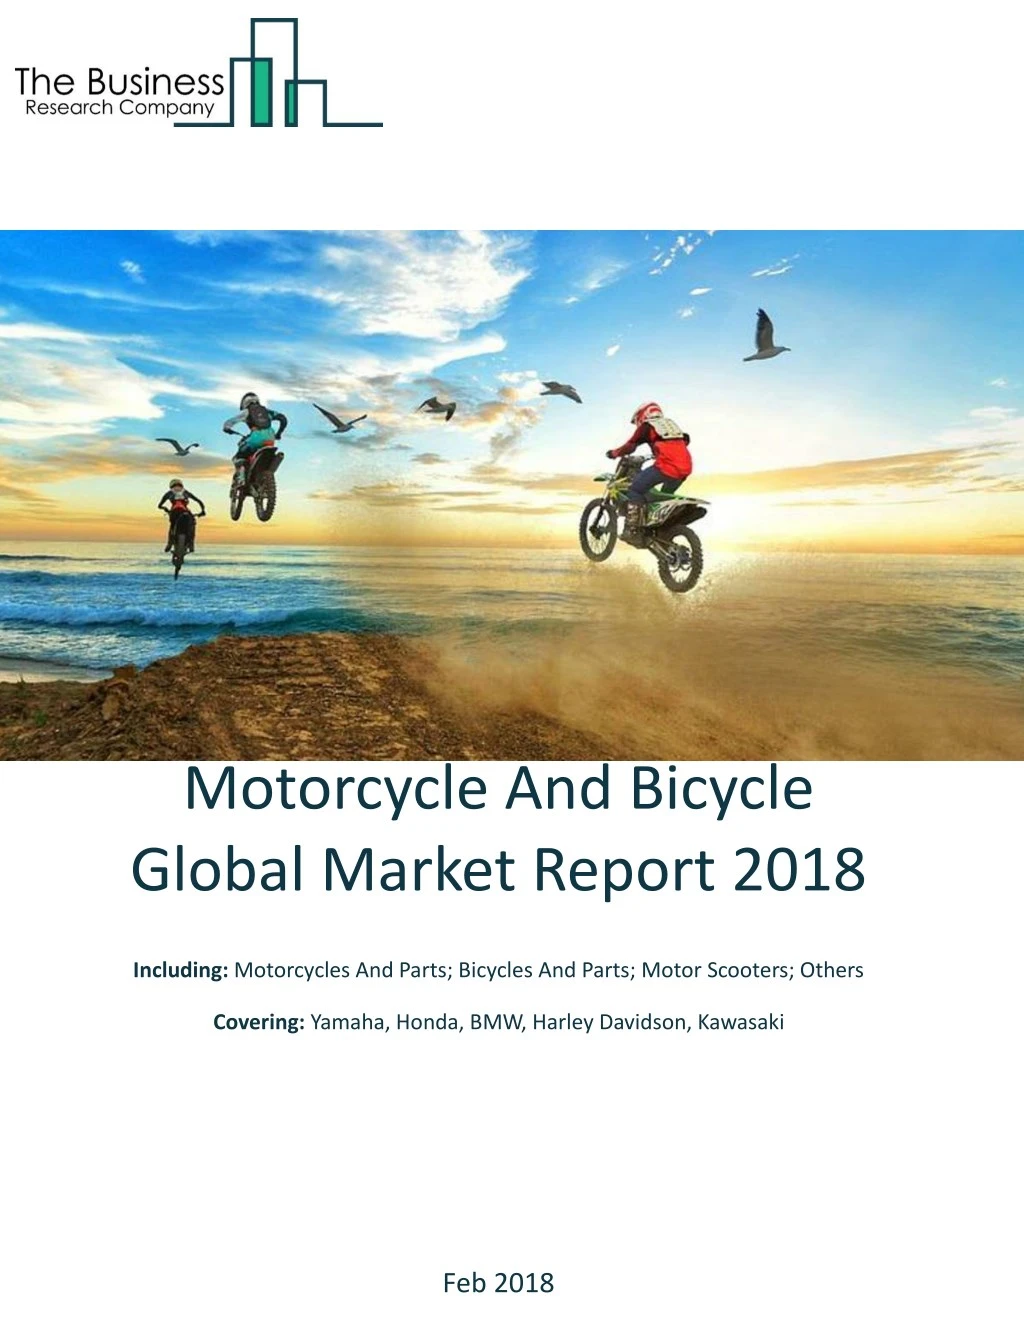 motorcycle and bicycle global market report 2018